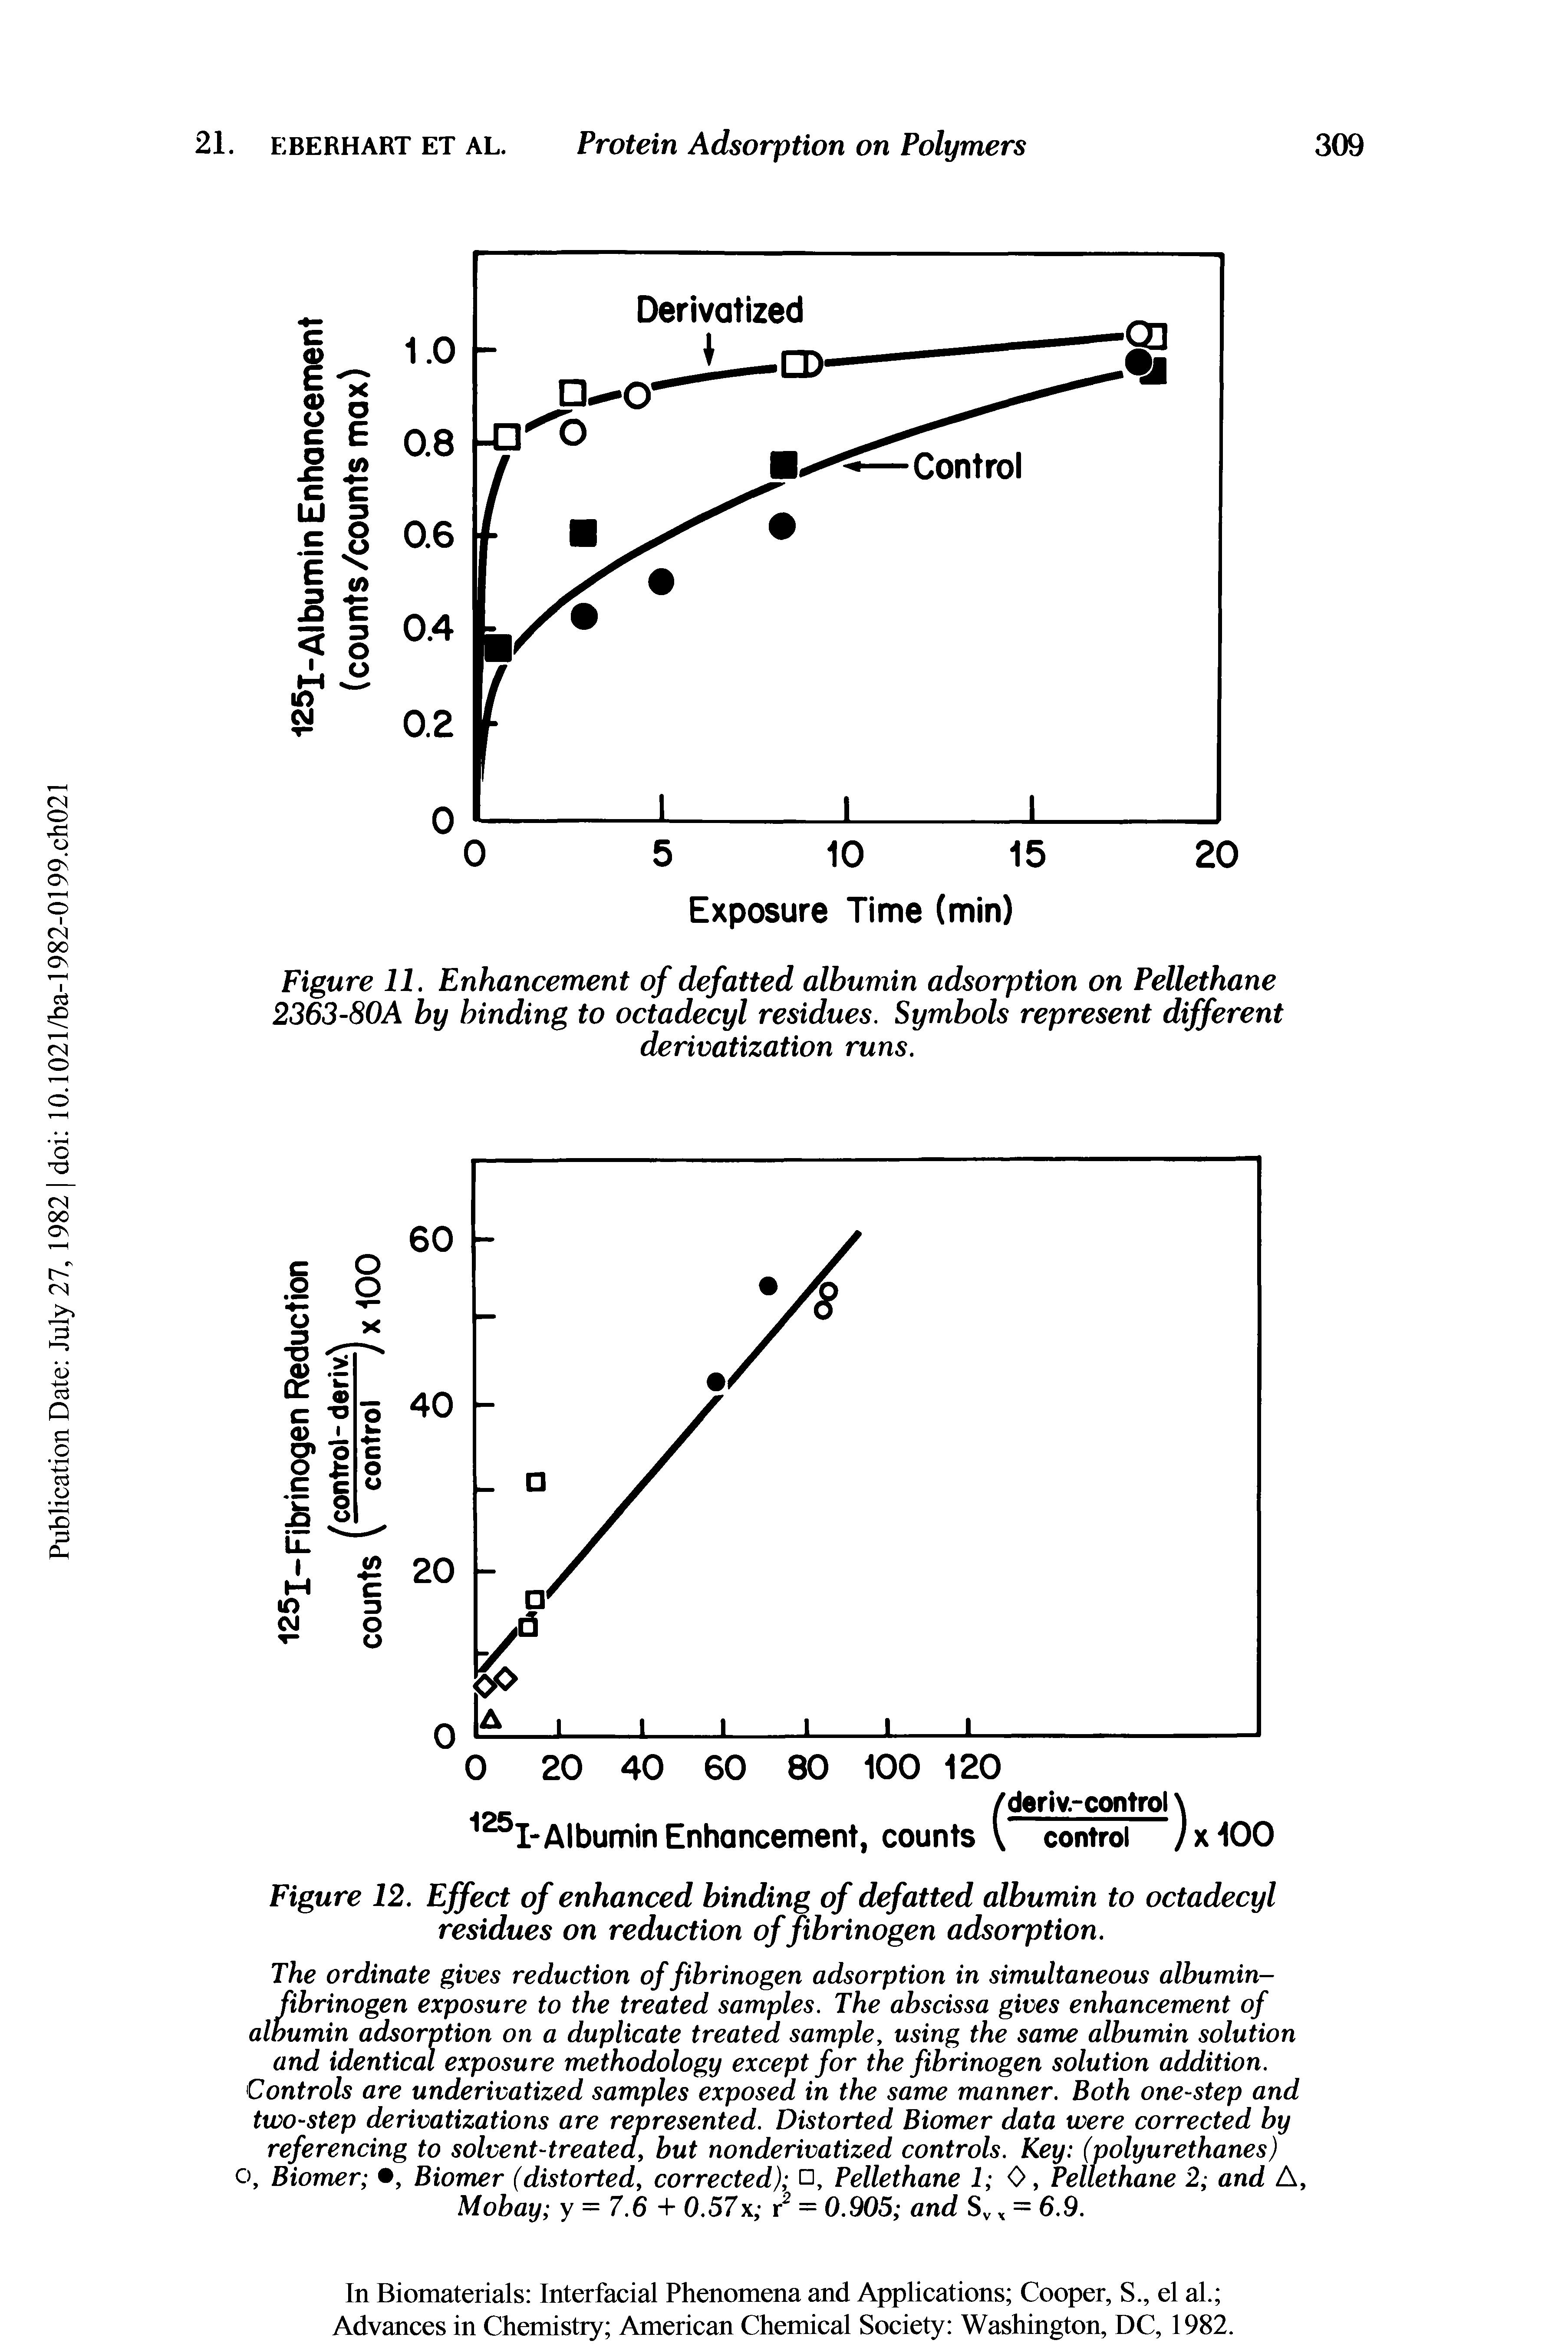 Figure 12. Effect of enhanced binding of defatted albumin to octadecyl residues on reduction of fibrinogen adsorption.